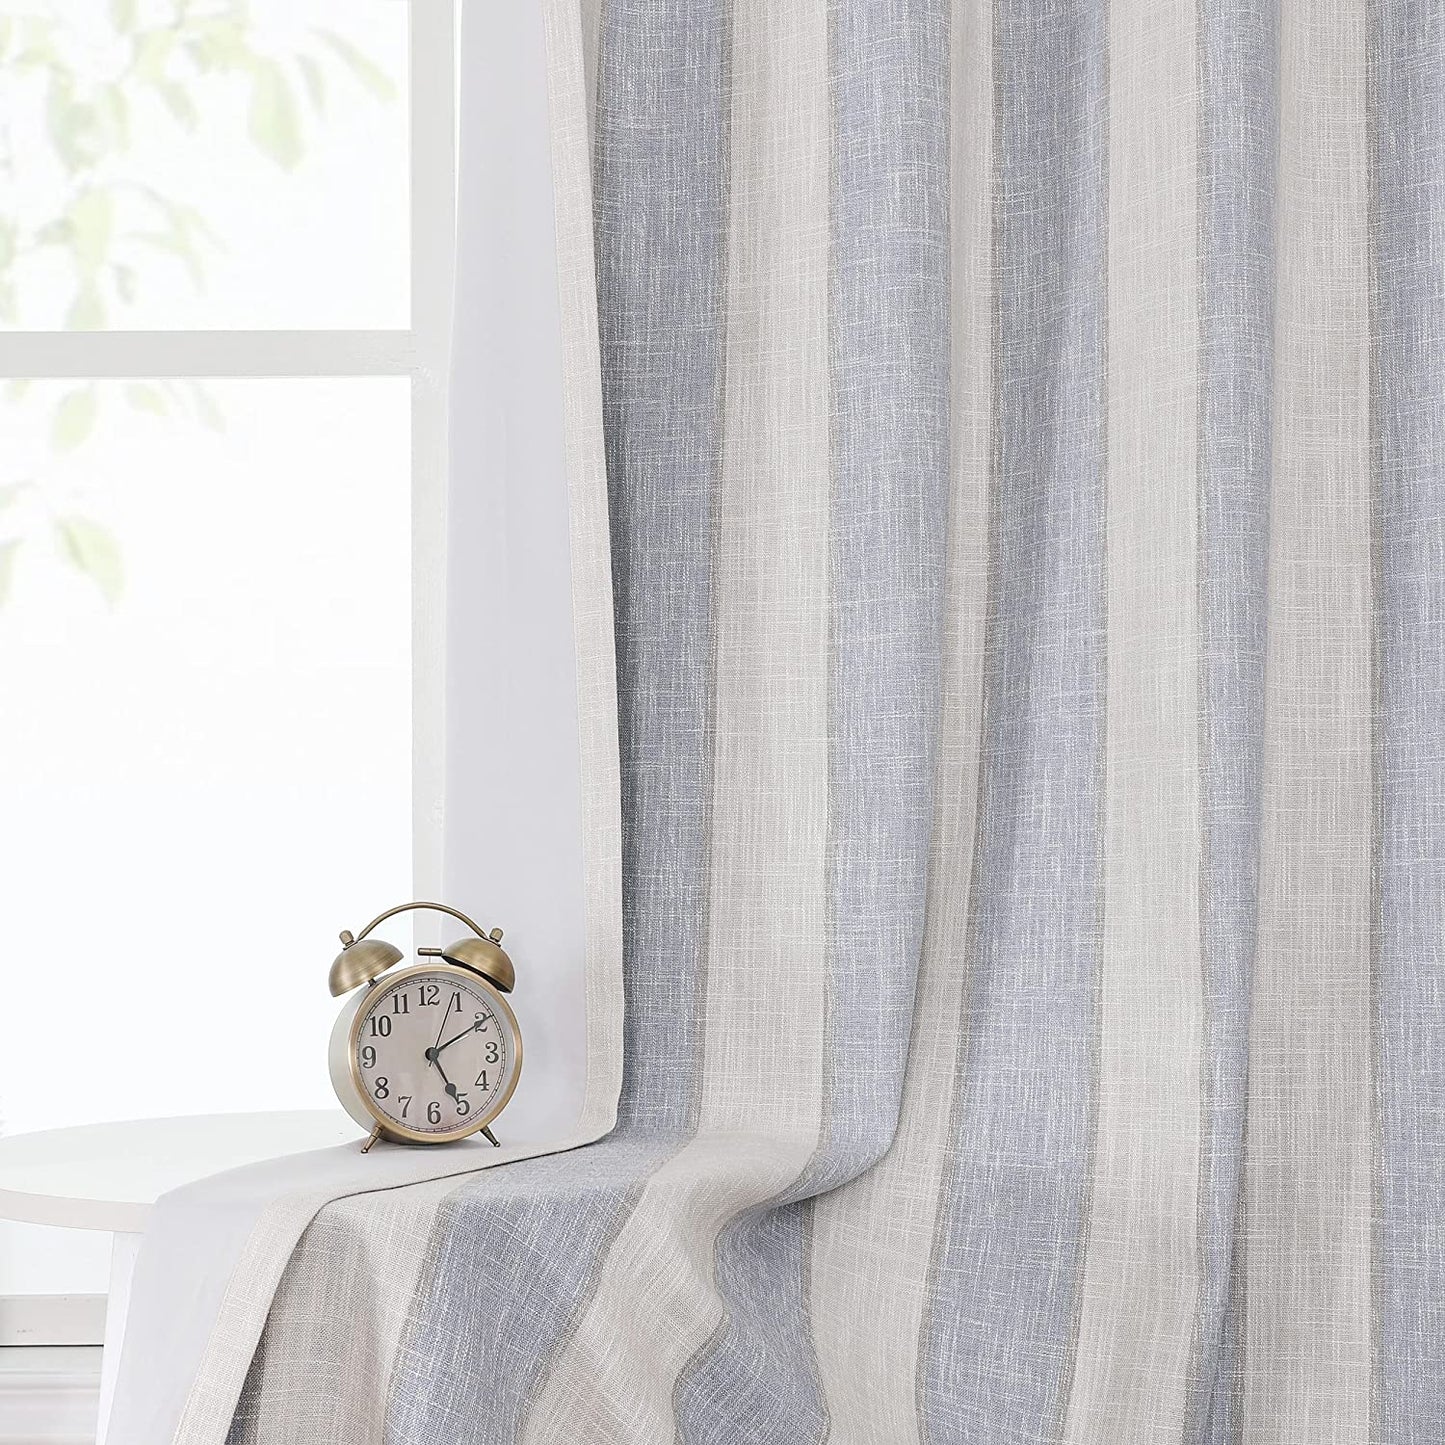 WEST LAKE Full Blackout Curtain Panel Grey Beige Vertical Stripe Window Treatment Grommets Thermal Insulated Noise Reducing 100 Blackout Drape for Living Room, Bedroom, 50"Wx84"L, 2 Panel, Gray/White  WEST LAKE Blue 50"Wx63"L|2 Panels 